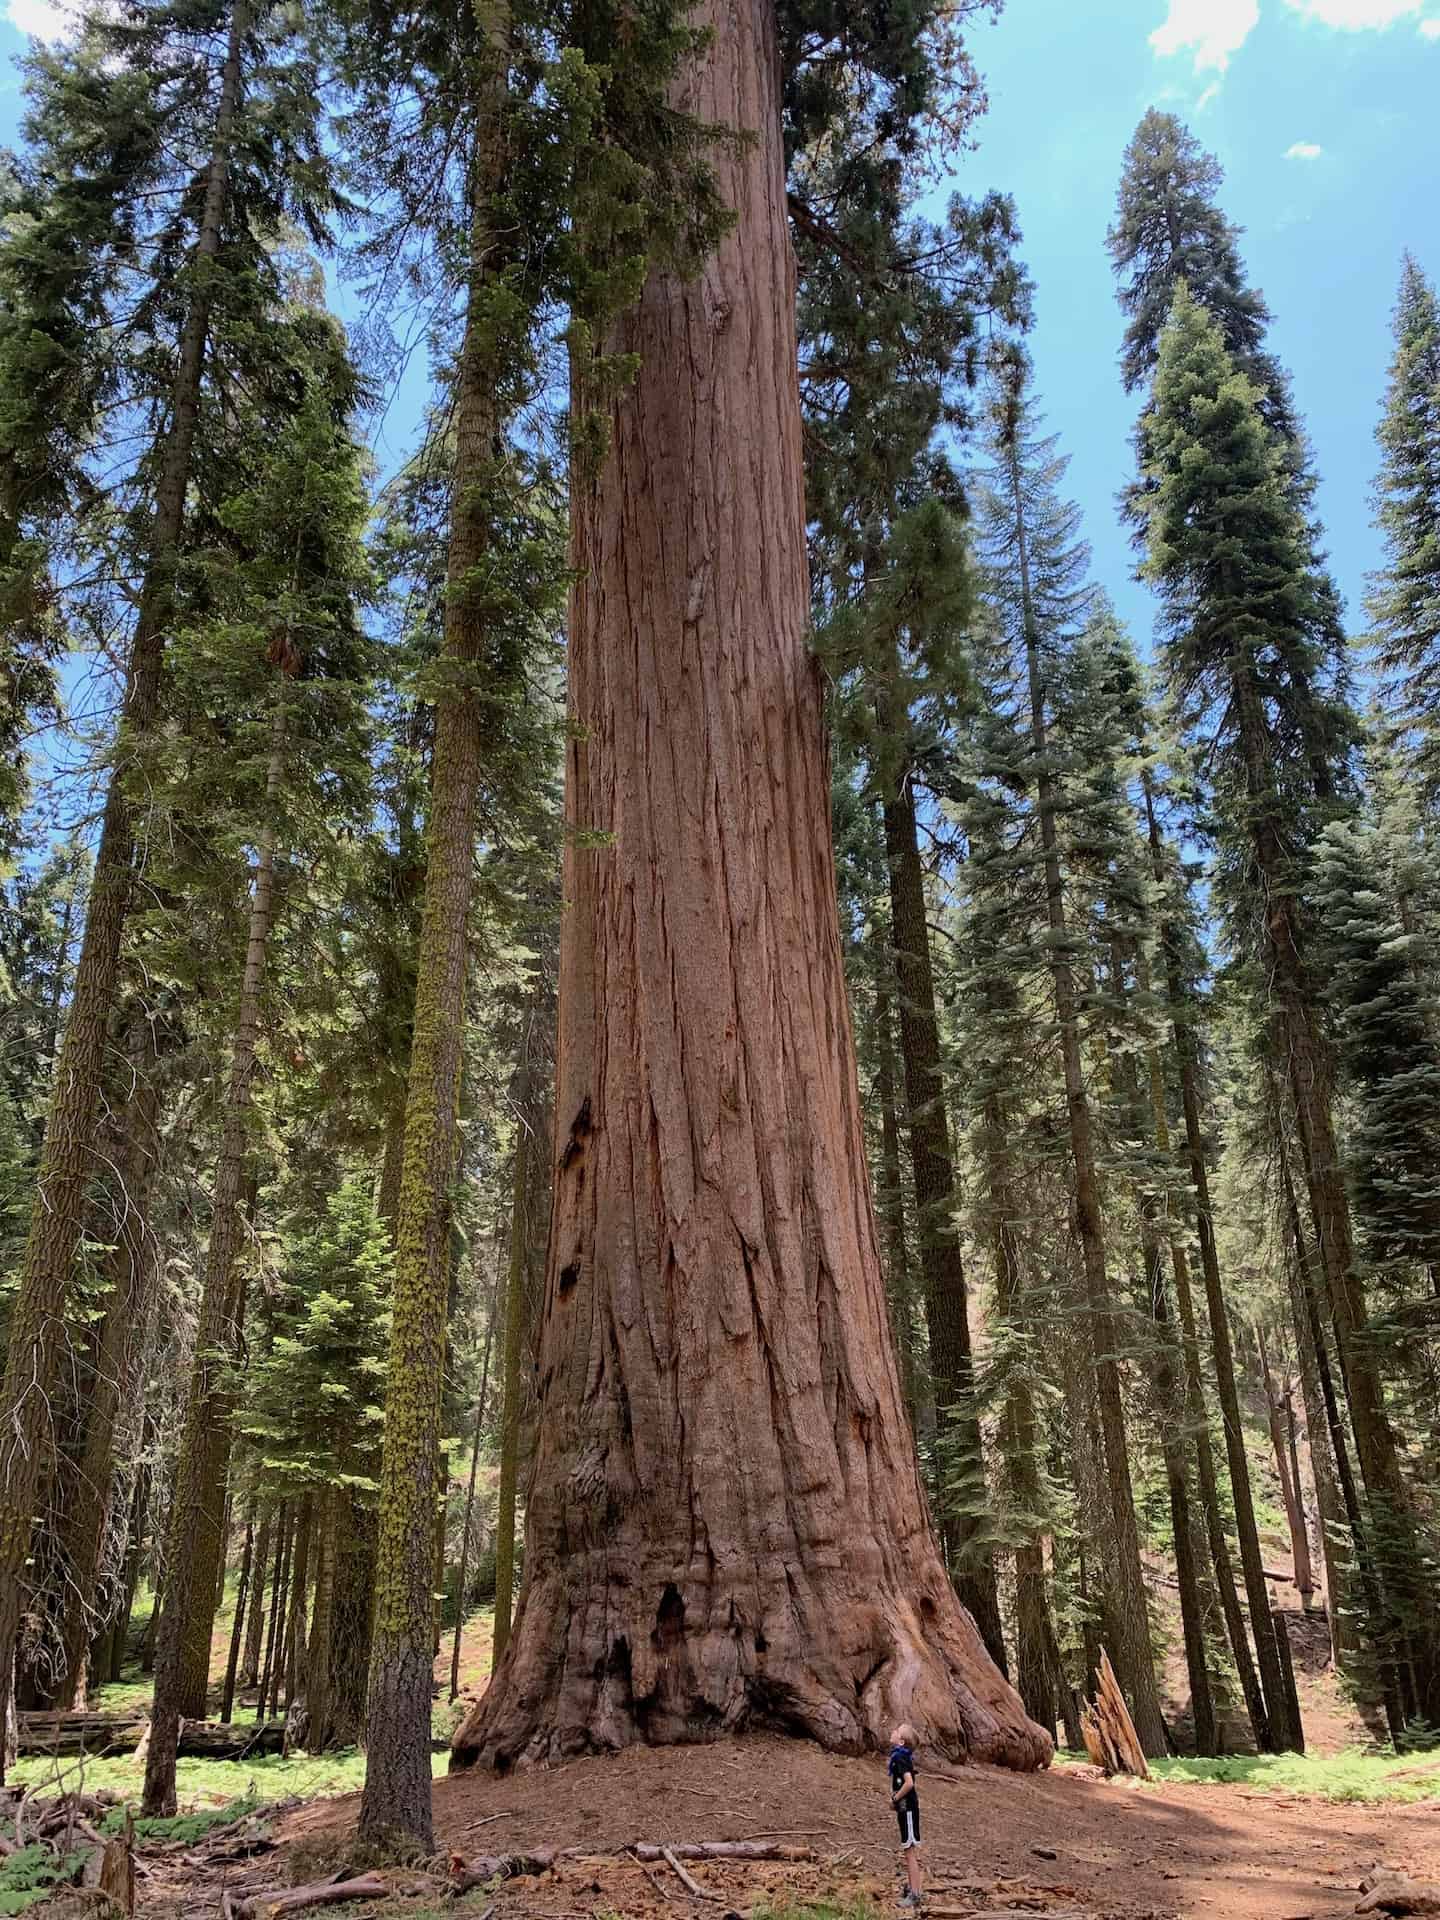 VISITING SEQUOIA NATIONAL PARK – WHAT TO DO IN SEQUOIA AND KINGS CANYON